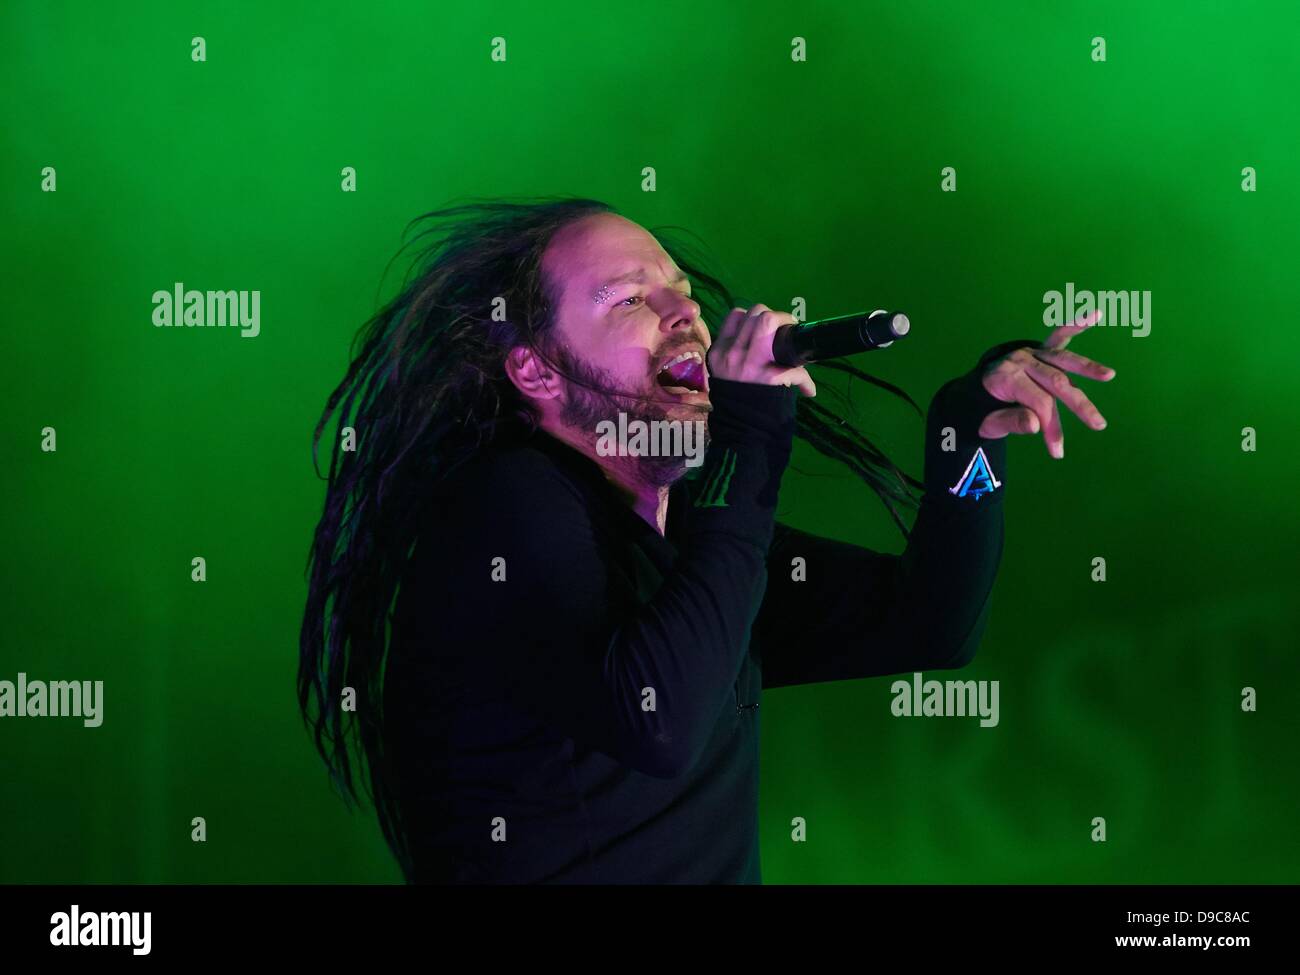 The singer of the US-band Korn, Jonathan Davis, performs on stage during the 'Rock am Ring' festival in Nuerburg, Germany, 7 June 2013. Photo: Thomas Frey Stock Photo